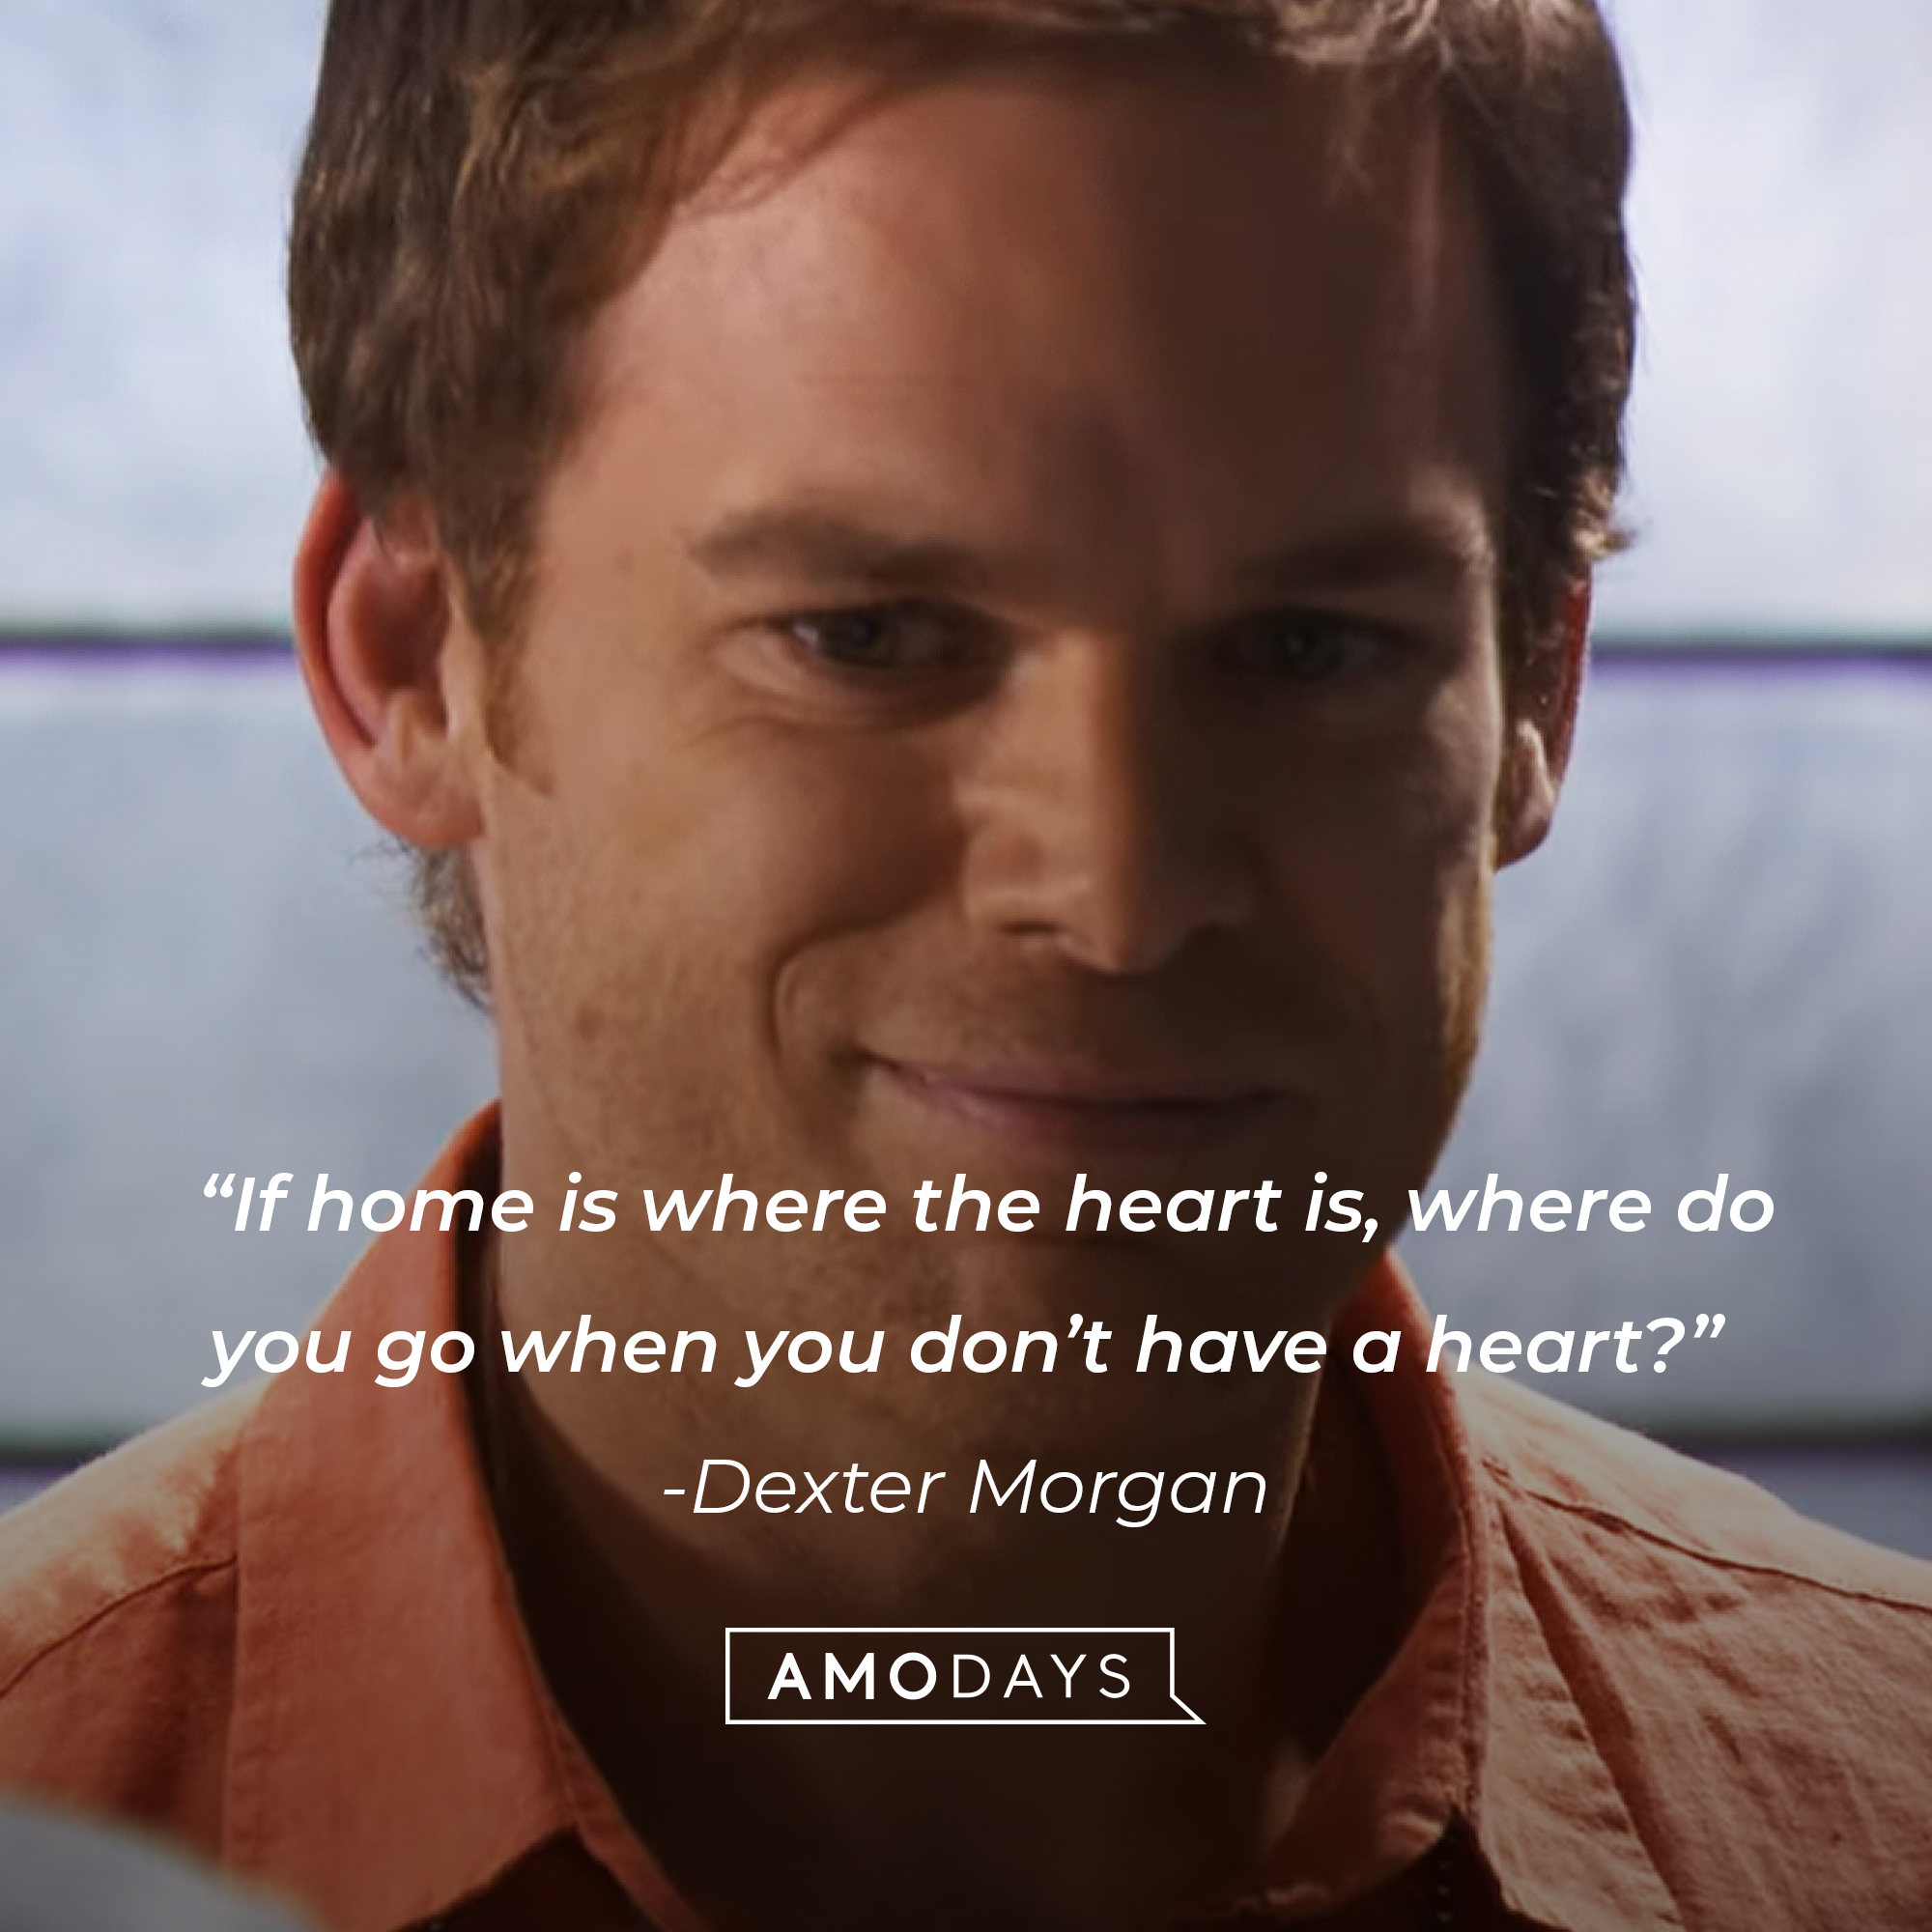 Dexter Morgan, with his quote: “If home is where the heart is, where do you go when you don’t have a heart?” | Source: Showtime